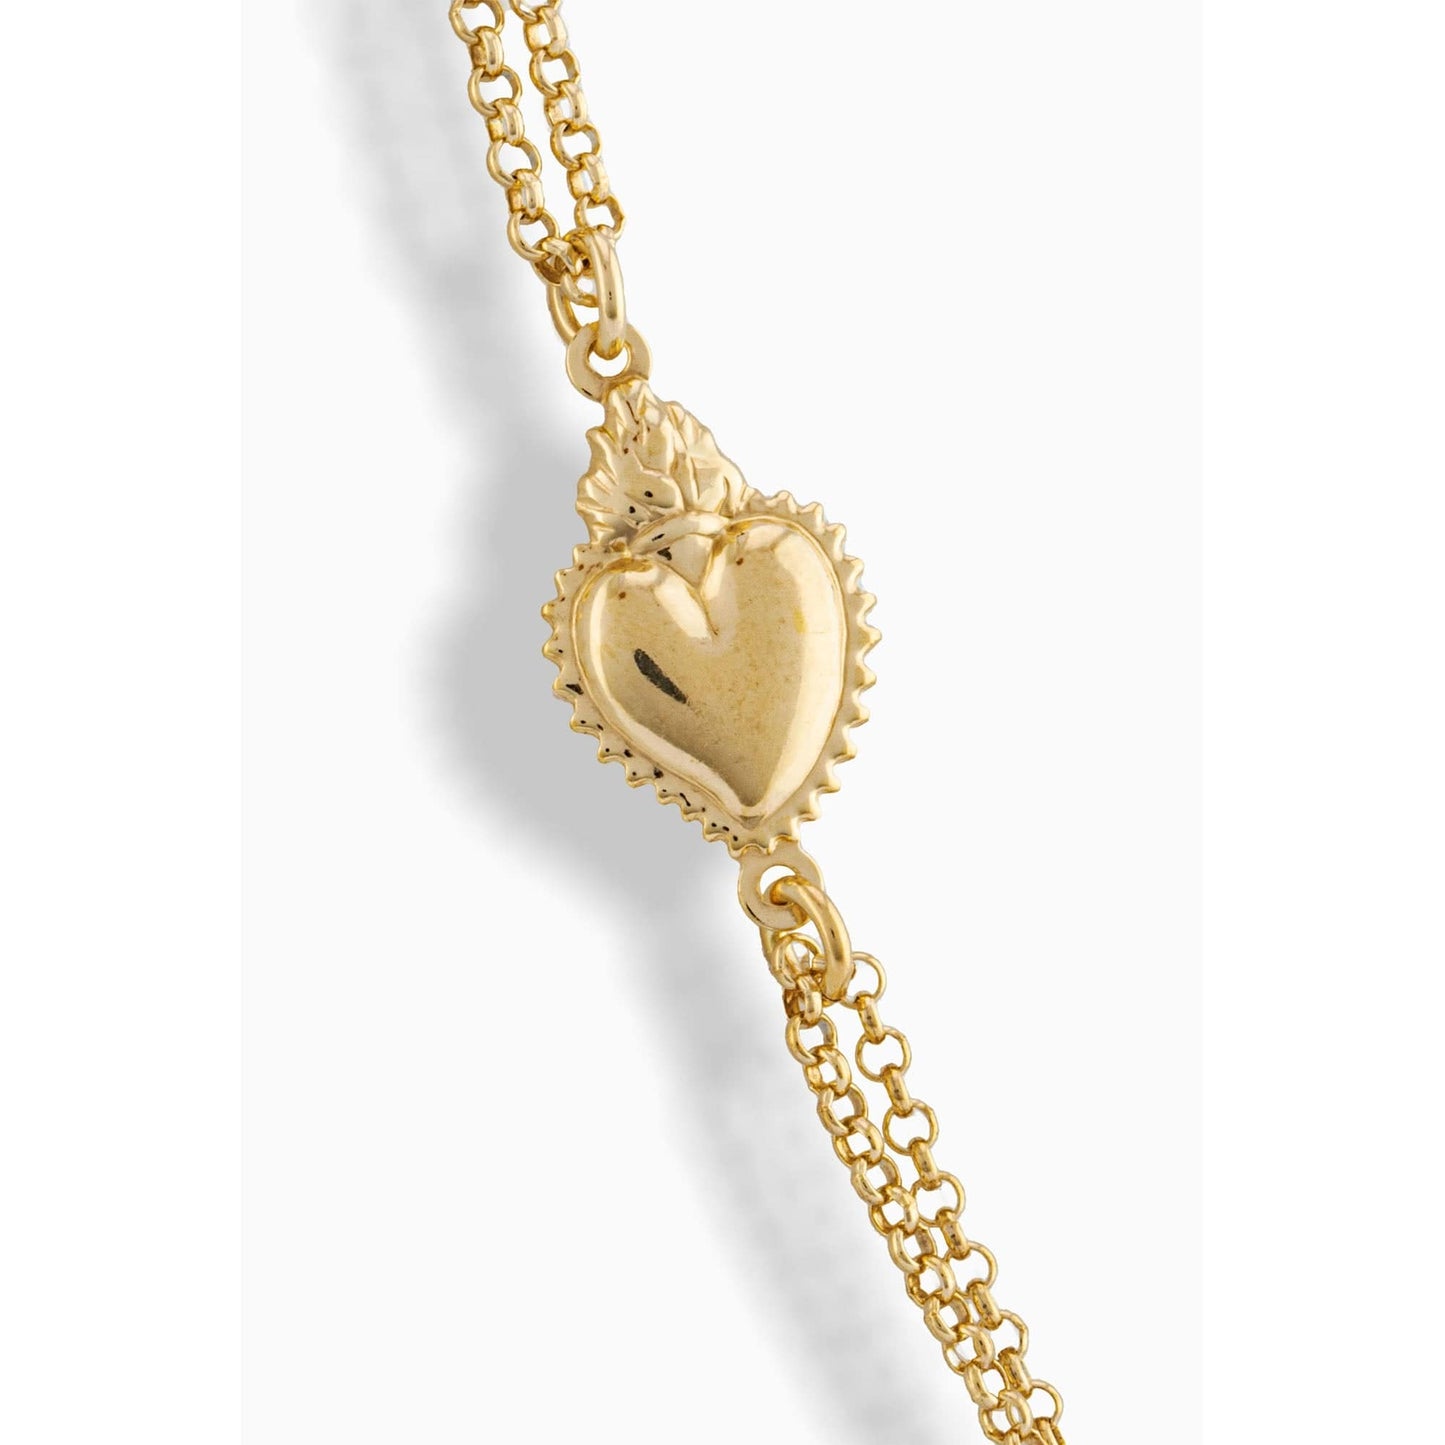 MONDO CATTOLICO Prayer Beads Gold / Cm 46 (18.1 in) STERLING SILVER PLATED SACRED HEART 2MM BLACK BEADS NECKLACE